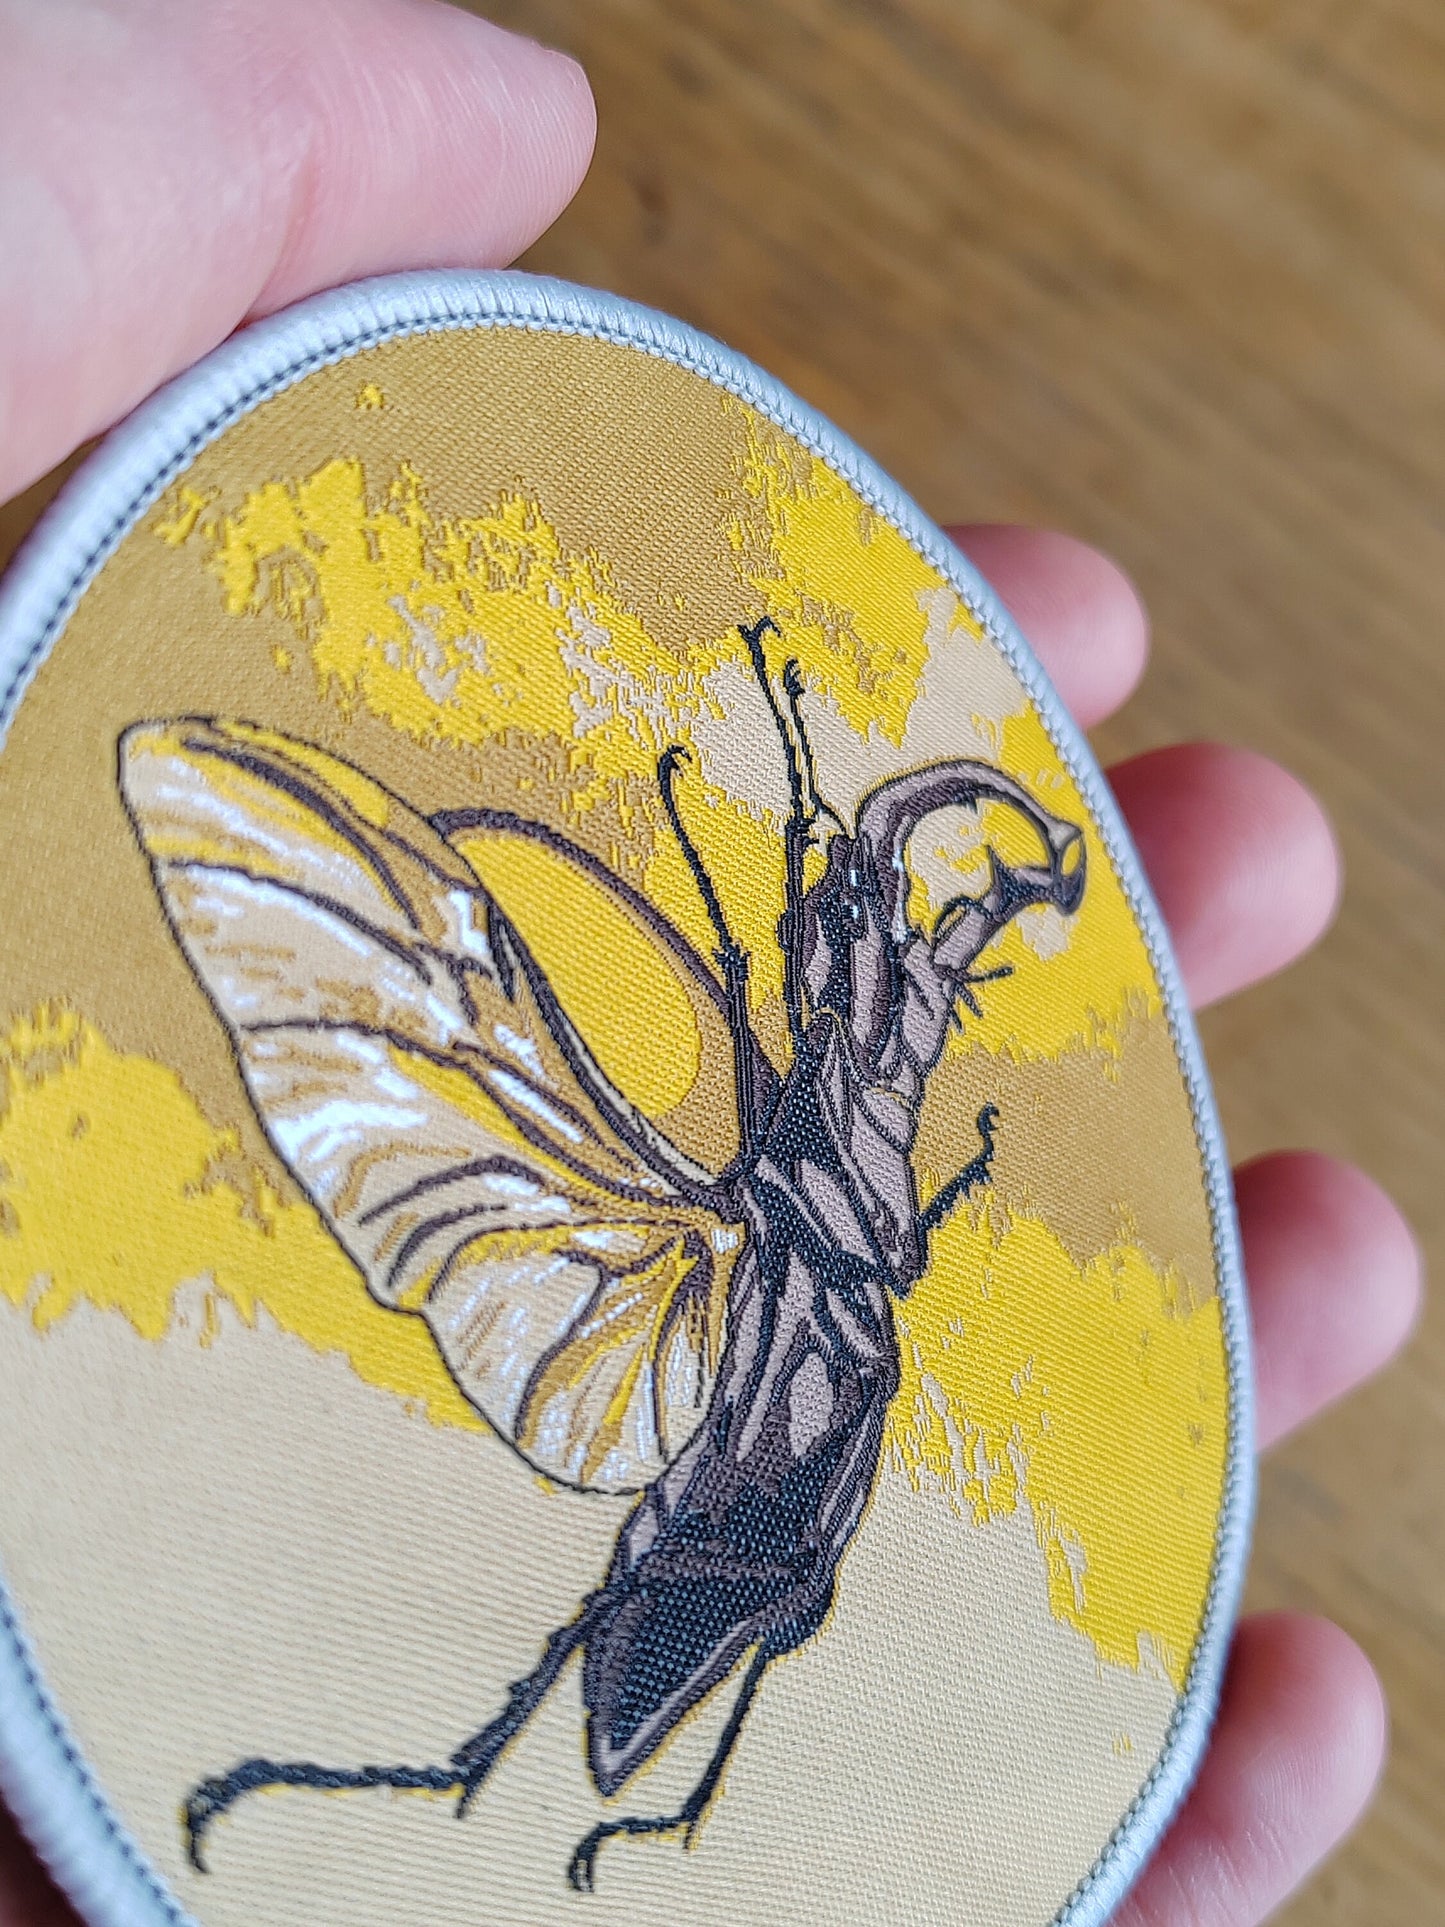 Sew on patch - Billywitch, Flying Stag Beetle (Lucanus cervus)